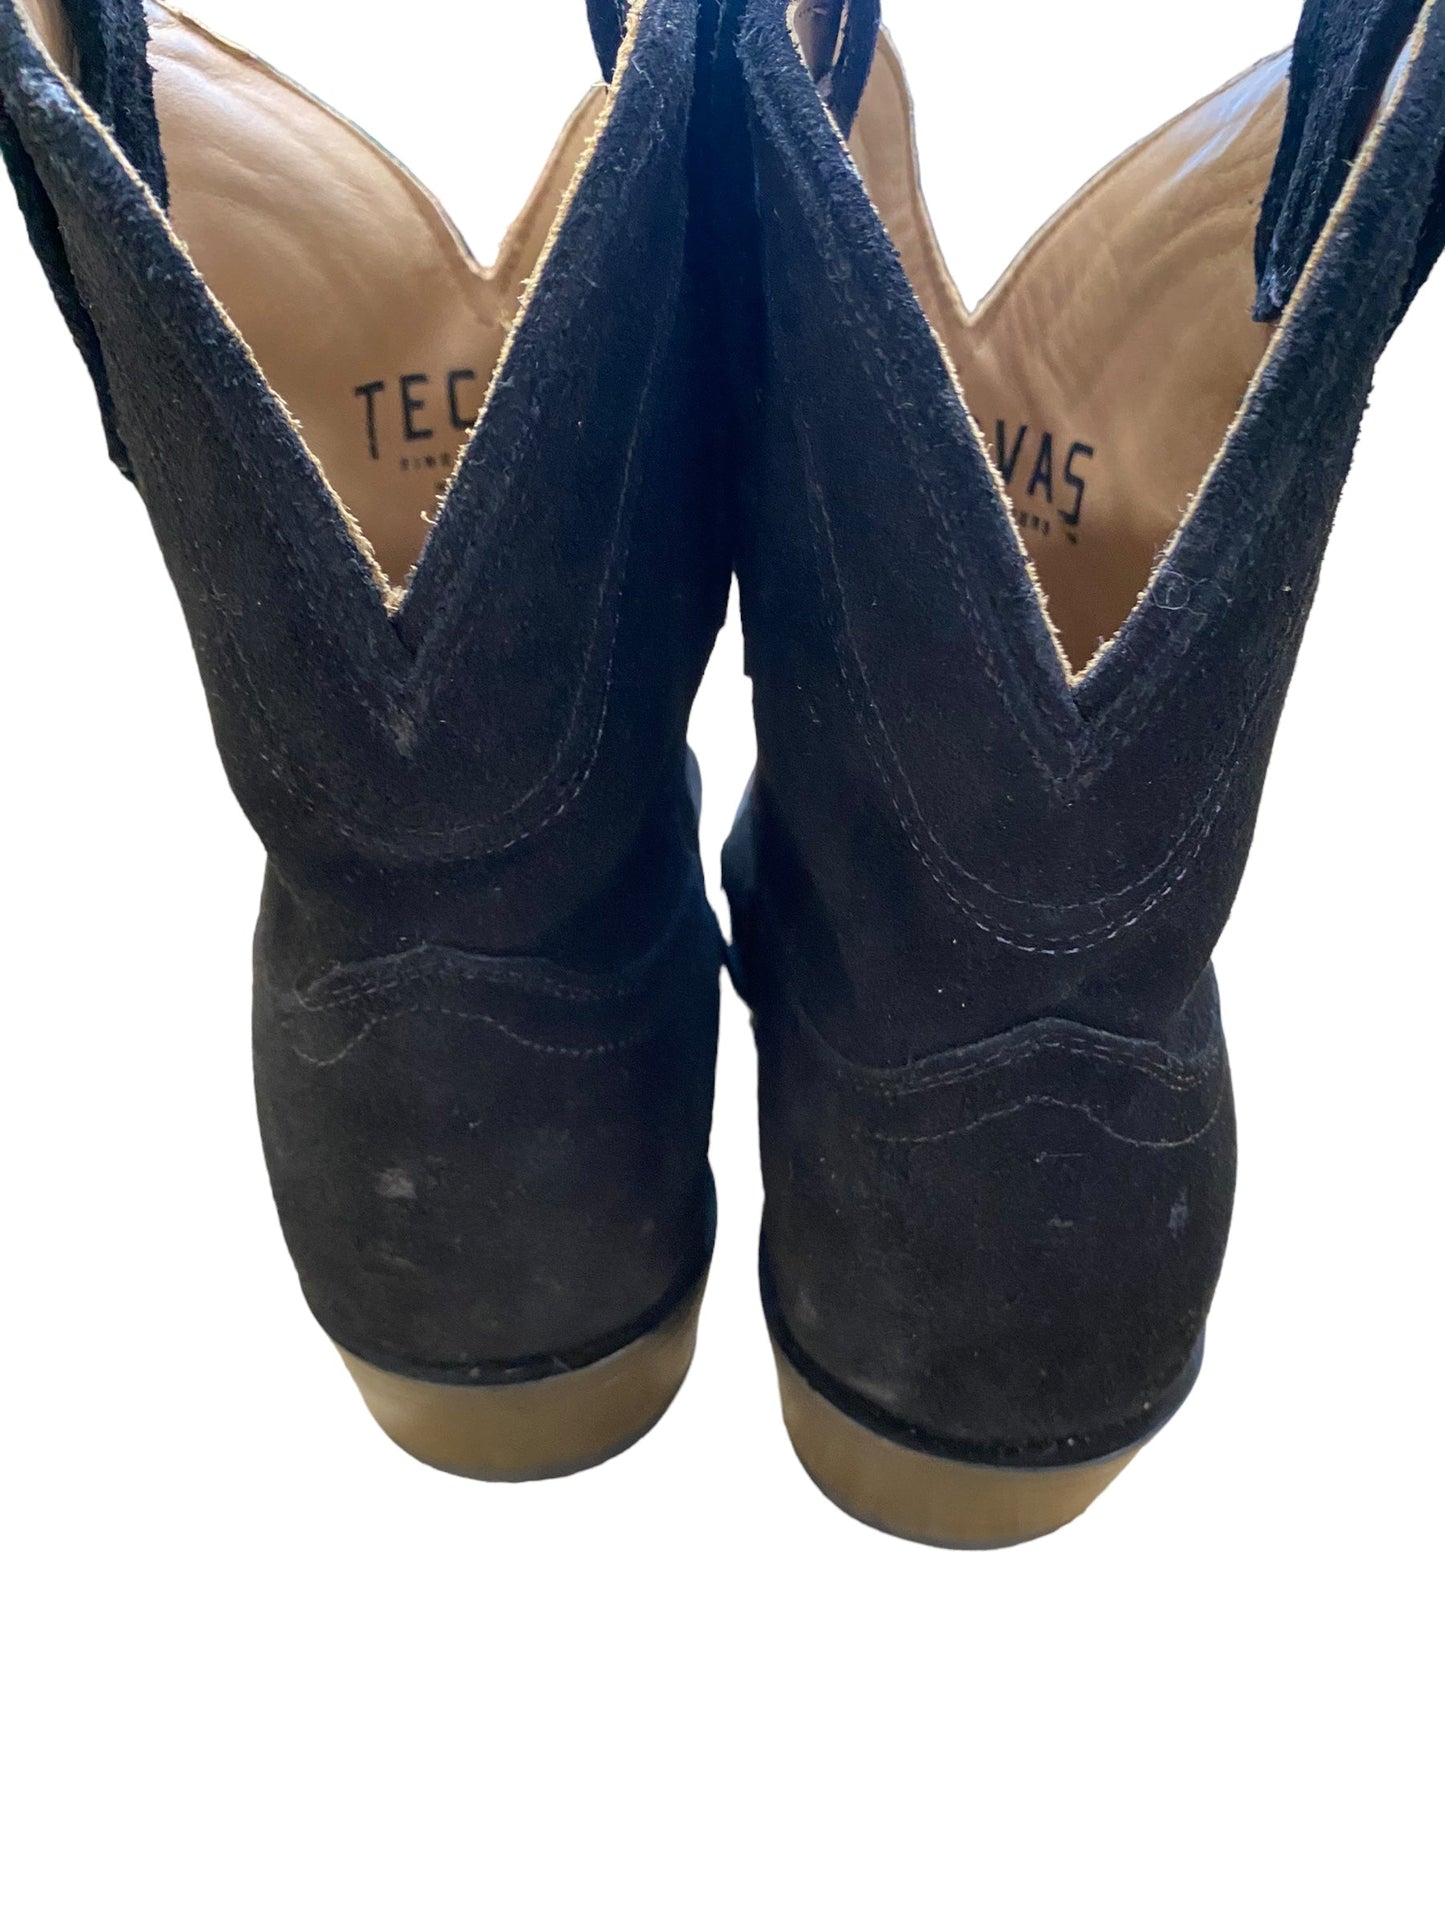 Black Boots Western Clothes Mentor, Size 7.5